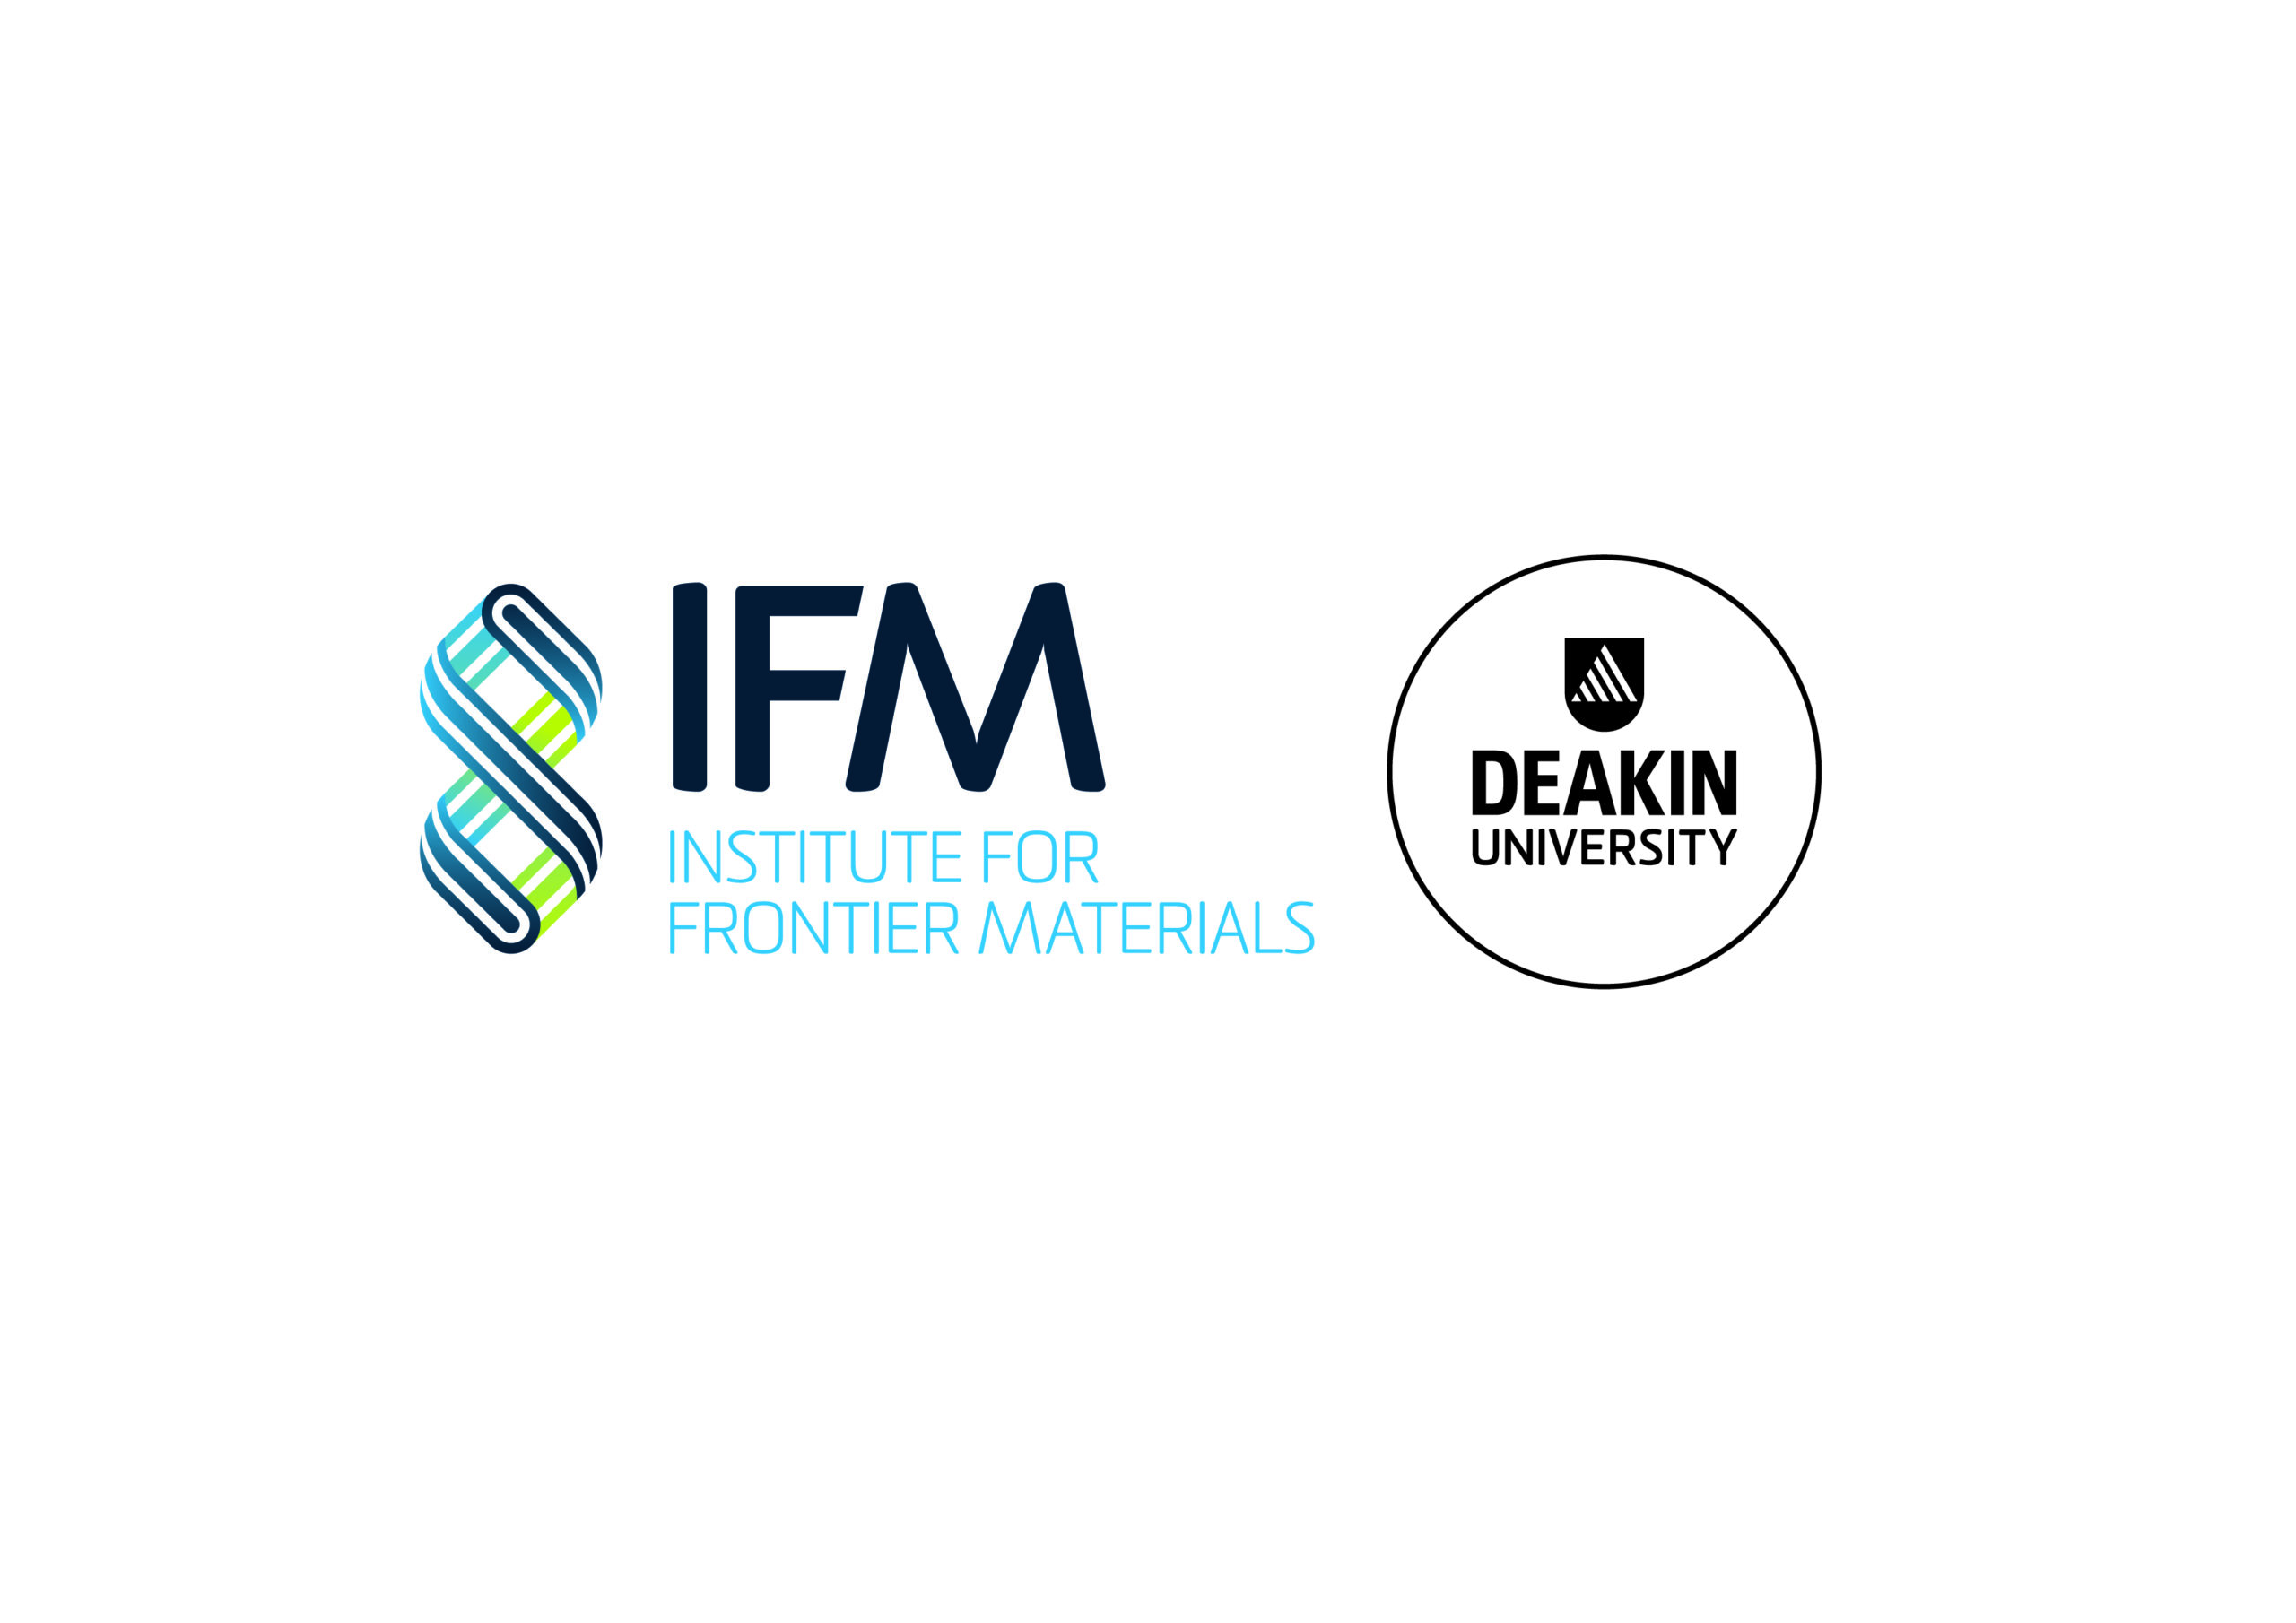 Institute for Frontier Materials and Deakin University combined large